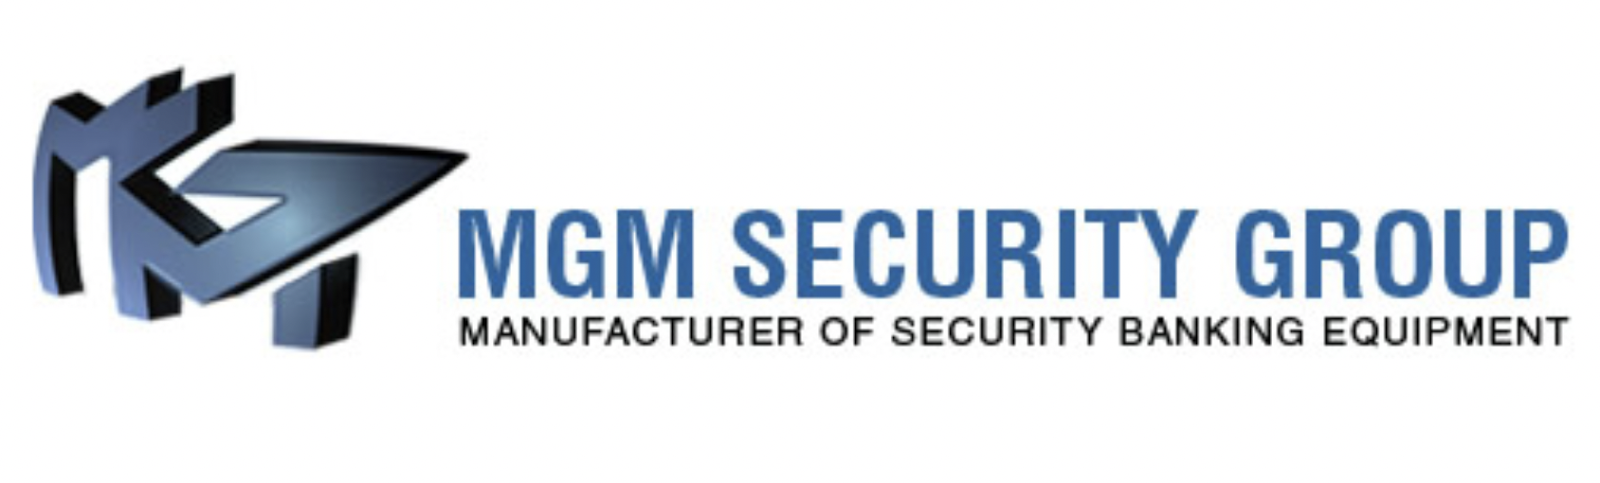 MGM Security Group logo